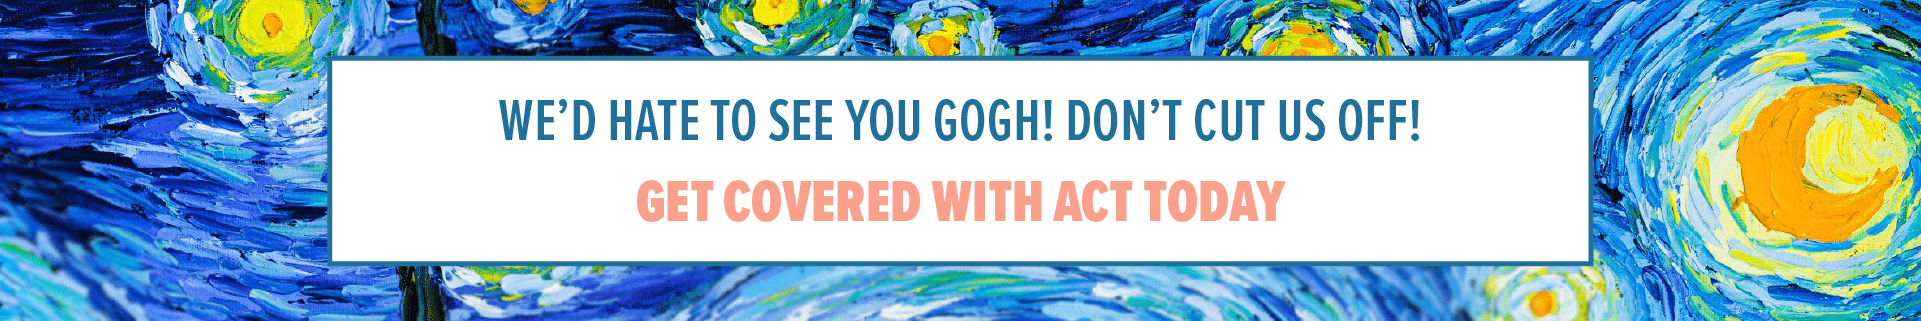 We’d hate to see you Gogh! Don’t cut us off!. Get covered with ACT today.